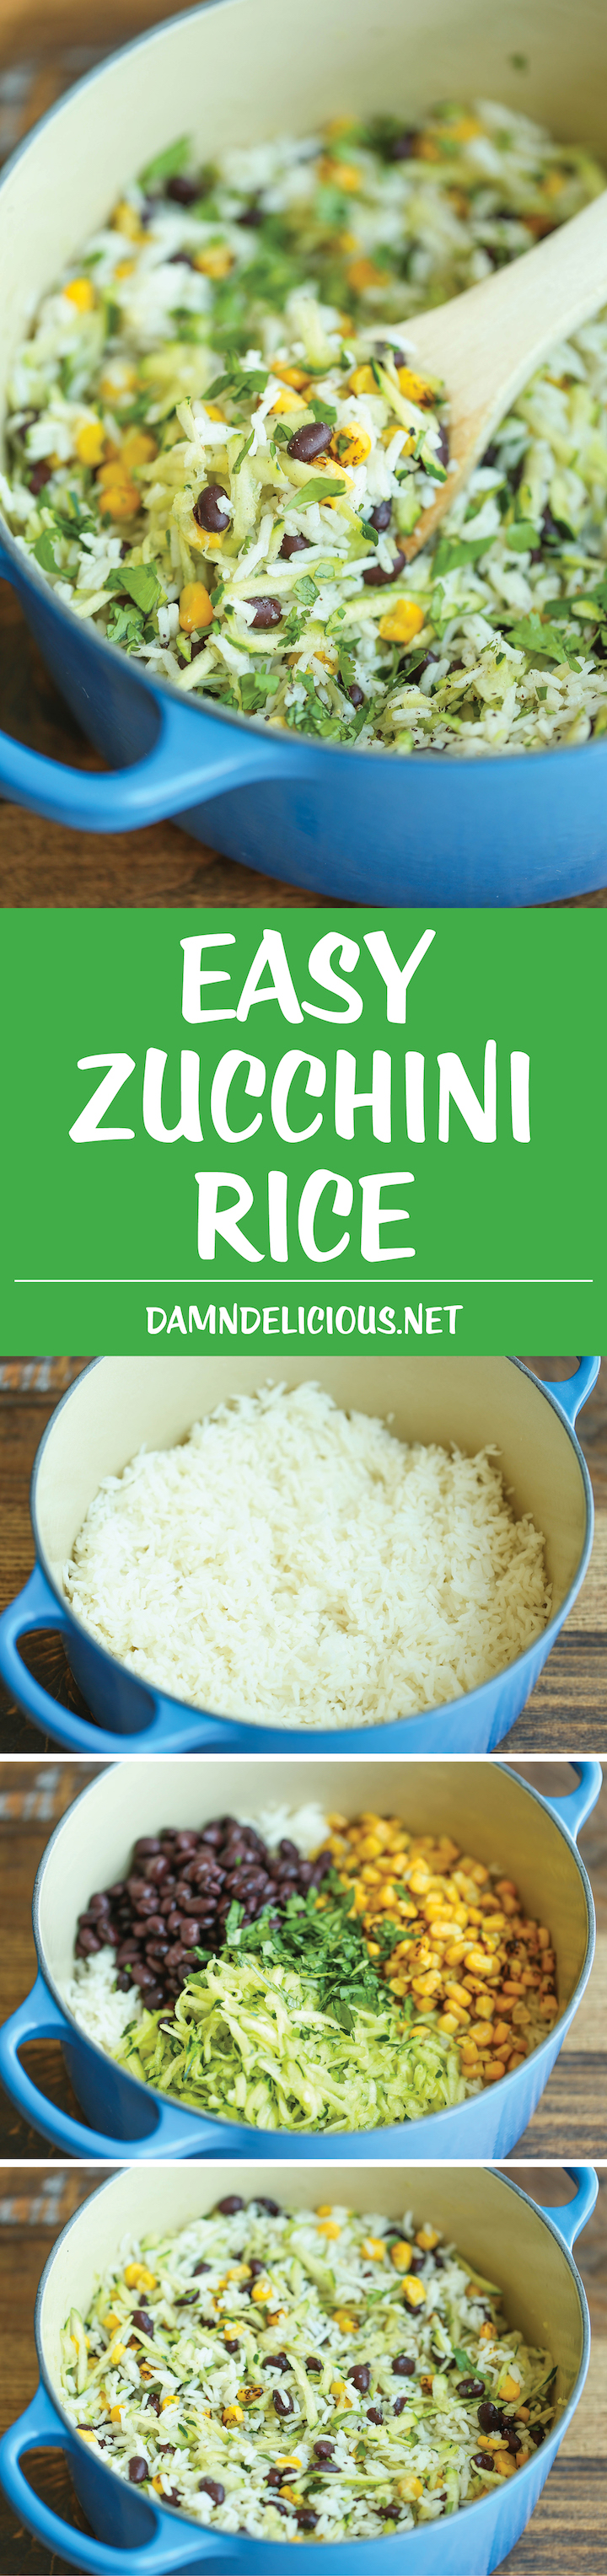 Zucchini Rice - A quick and easy side dish that’s not only fresh, healthy, and hearty but it goes well with anything and everything!